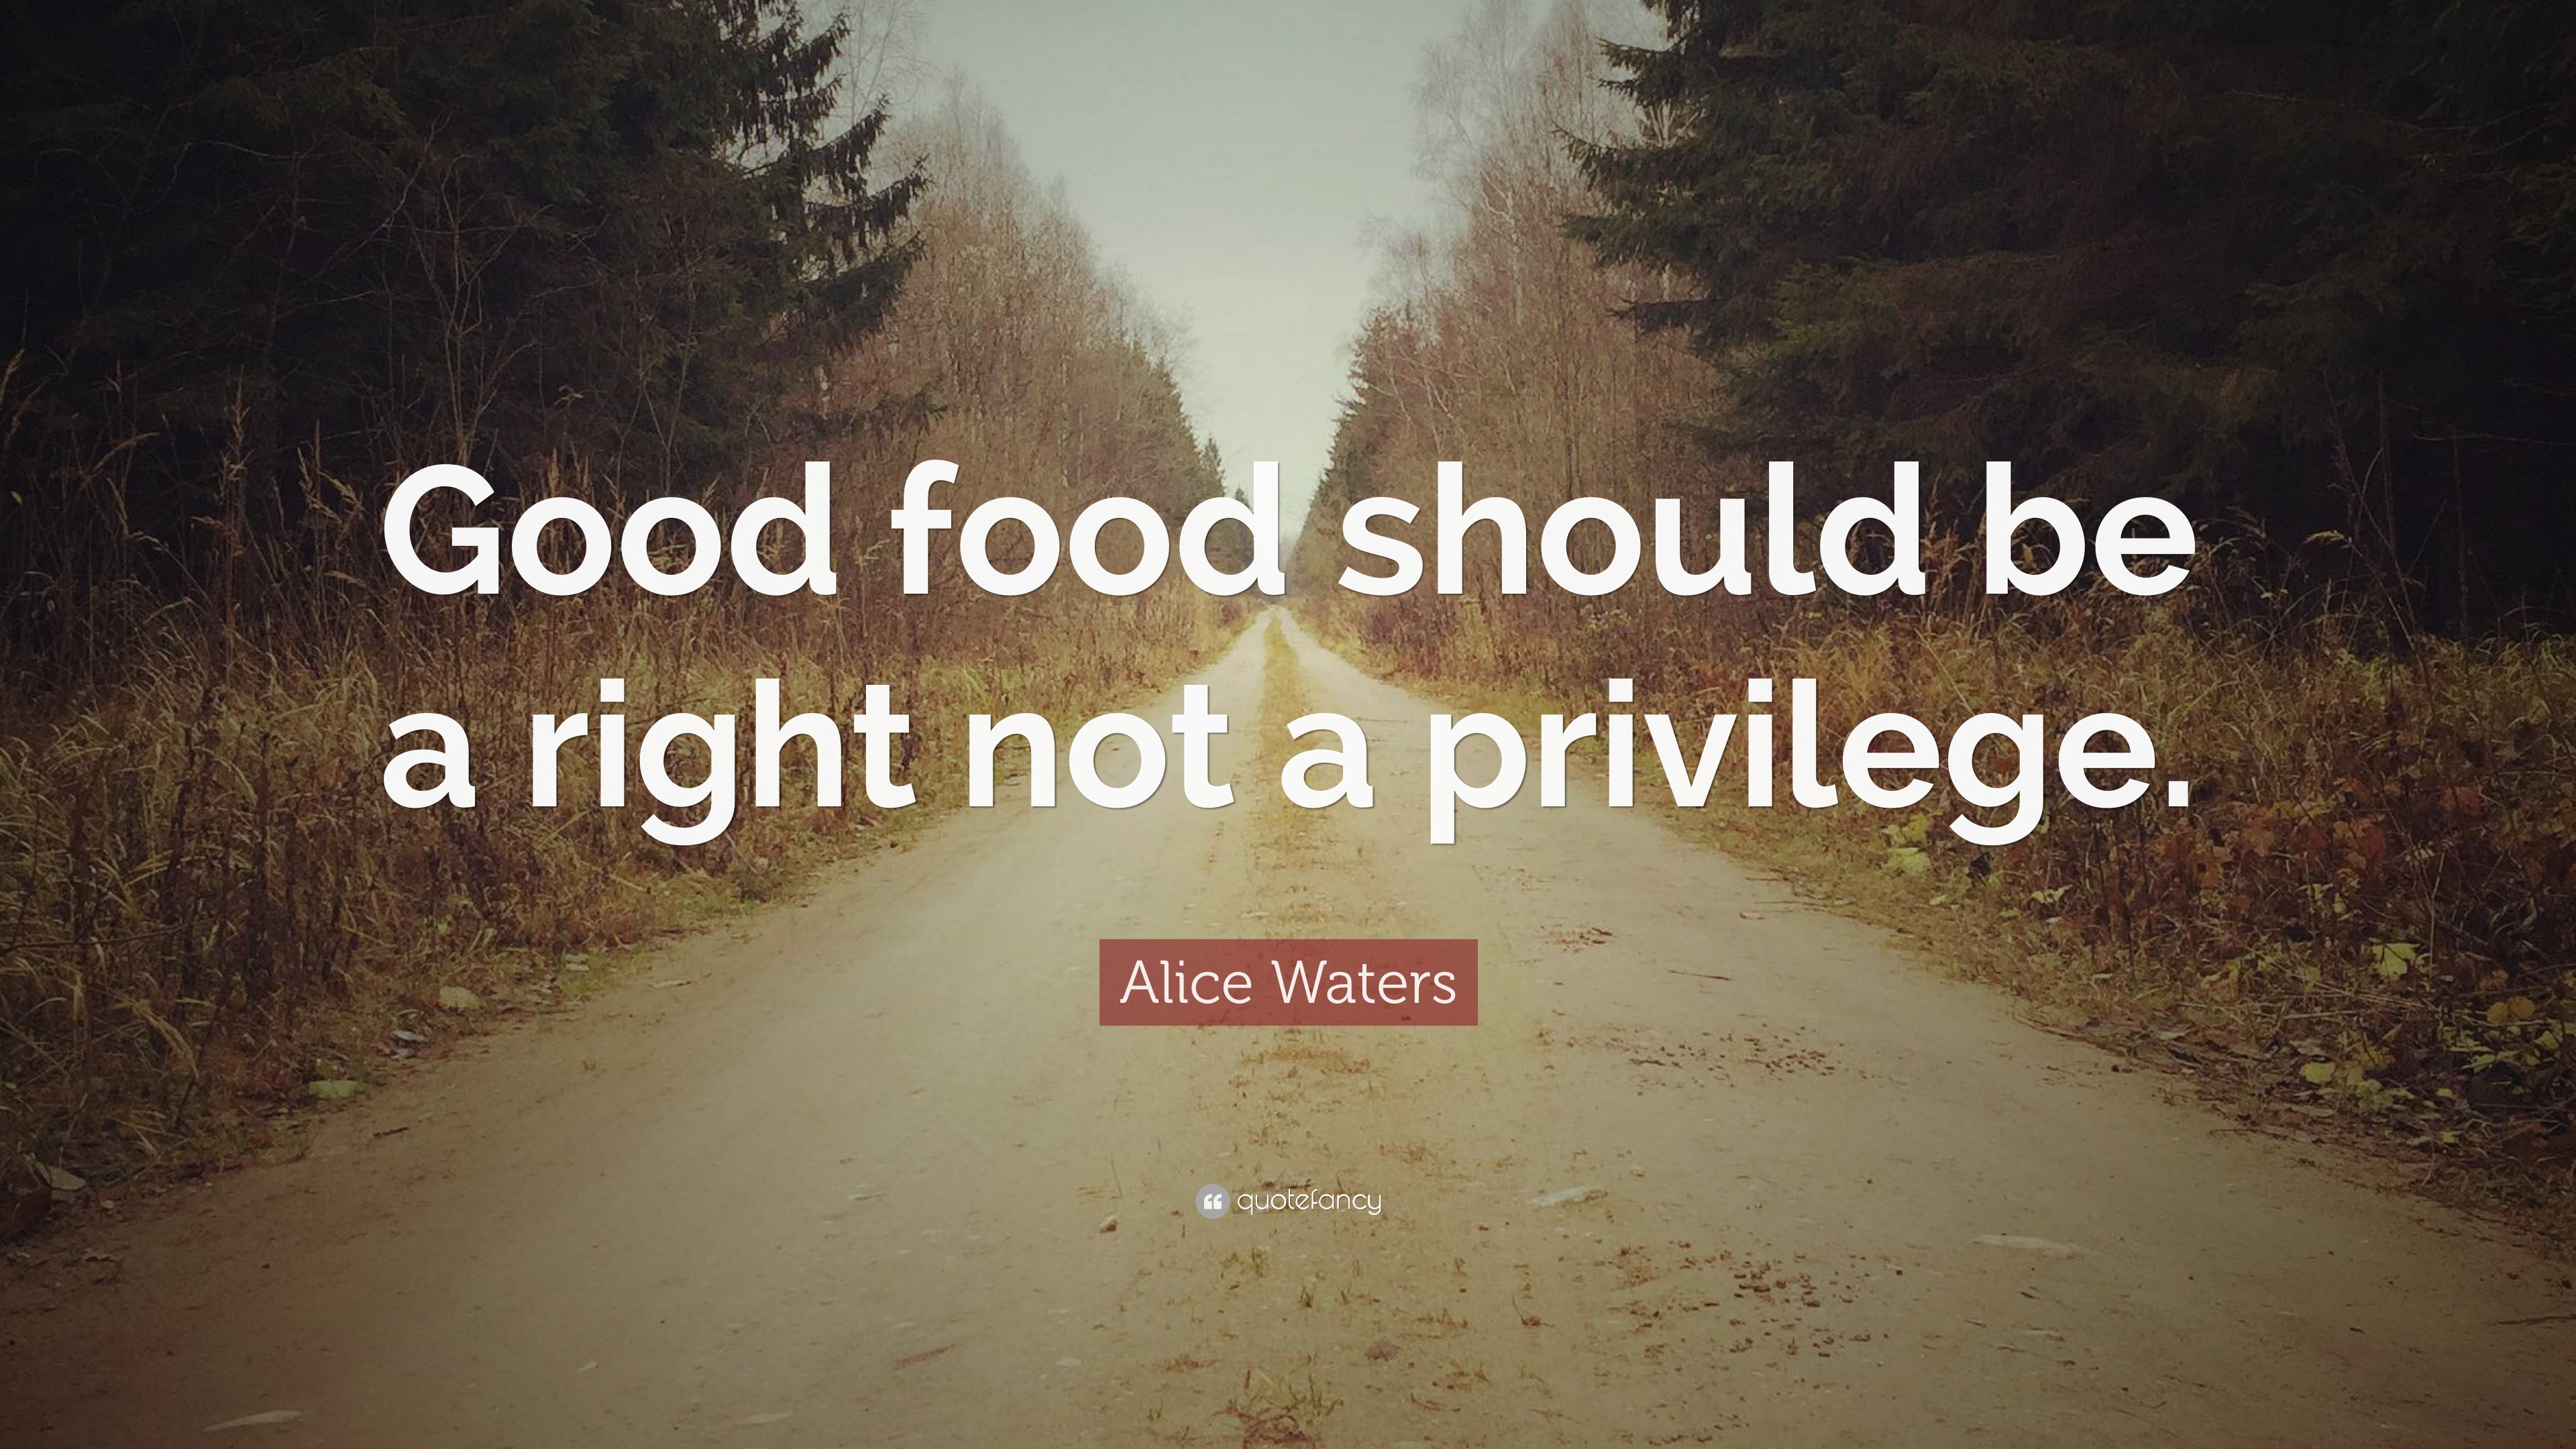 Alice Waters Quote: “Good food should be a right not a